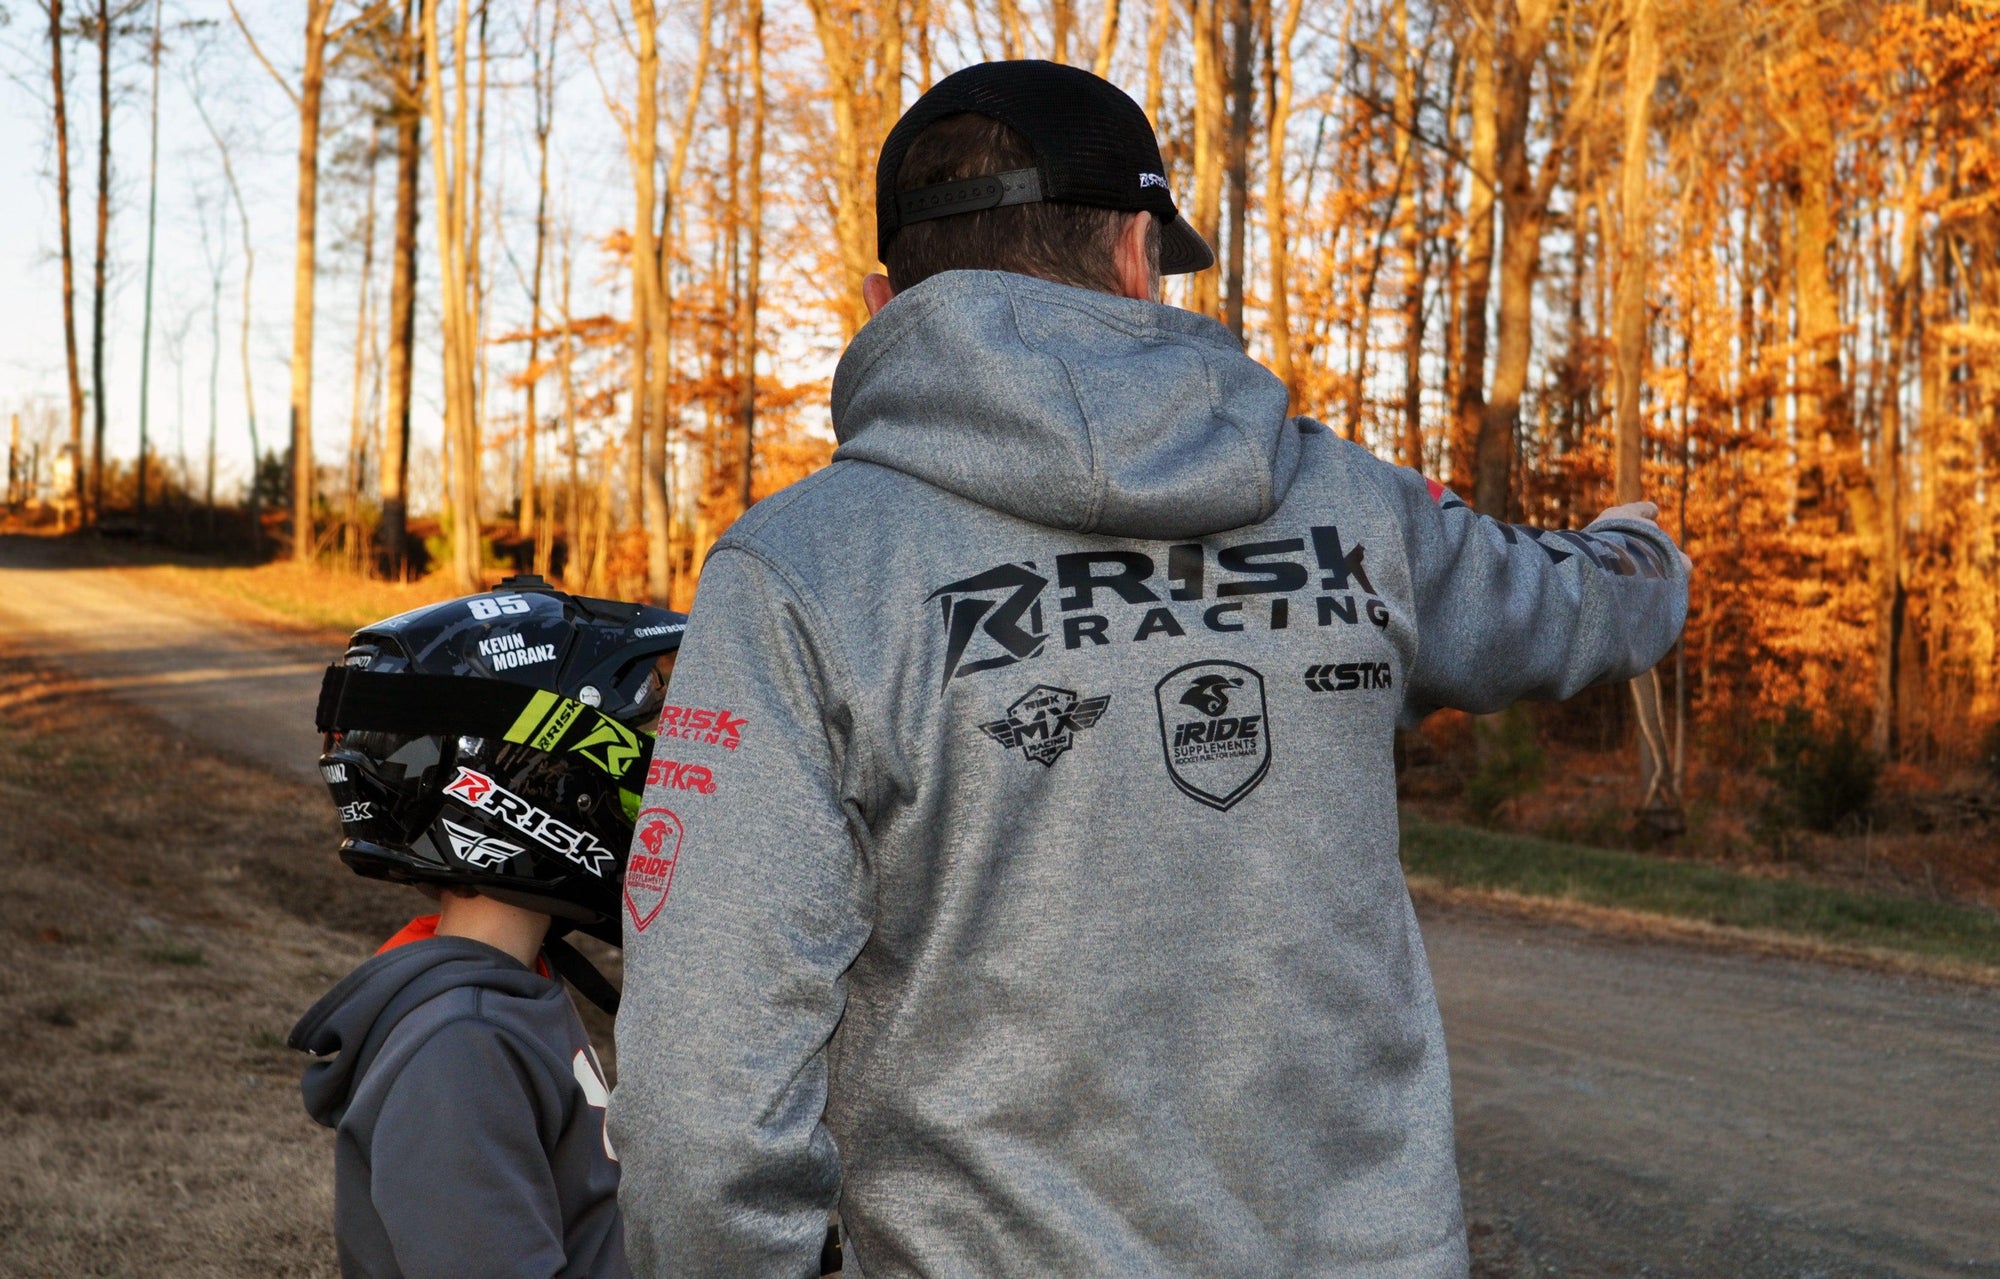 Male wearing the new Risk Zipper hoodie standing next to a young man wearing a black MX helmet. captured from behind showing the back of the jacket.